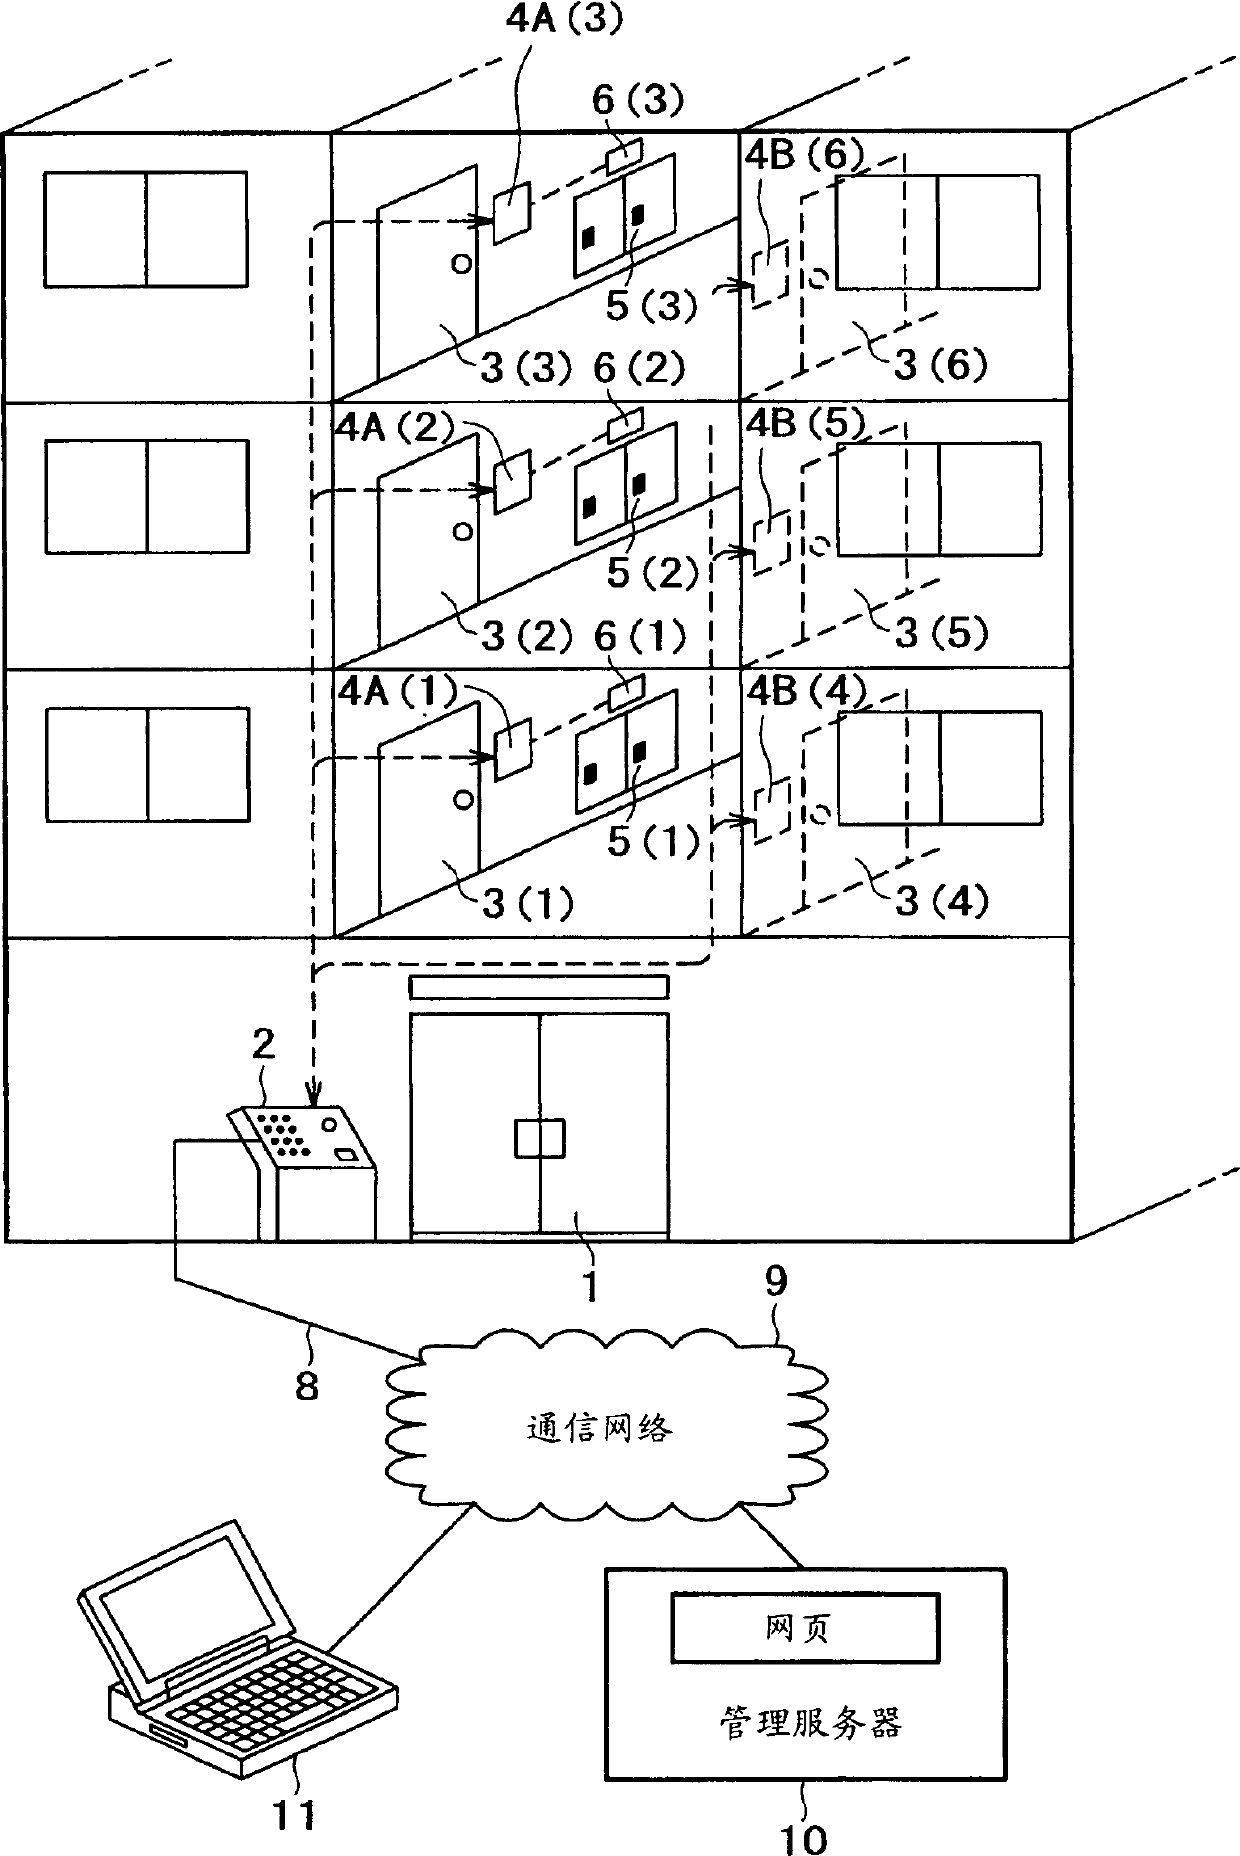 Collective housing shared entrance device, collective housing door-to-door interphone device, door-to-door container box management device, and communication system